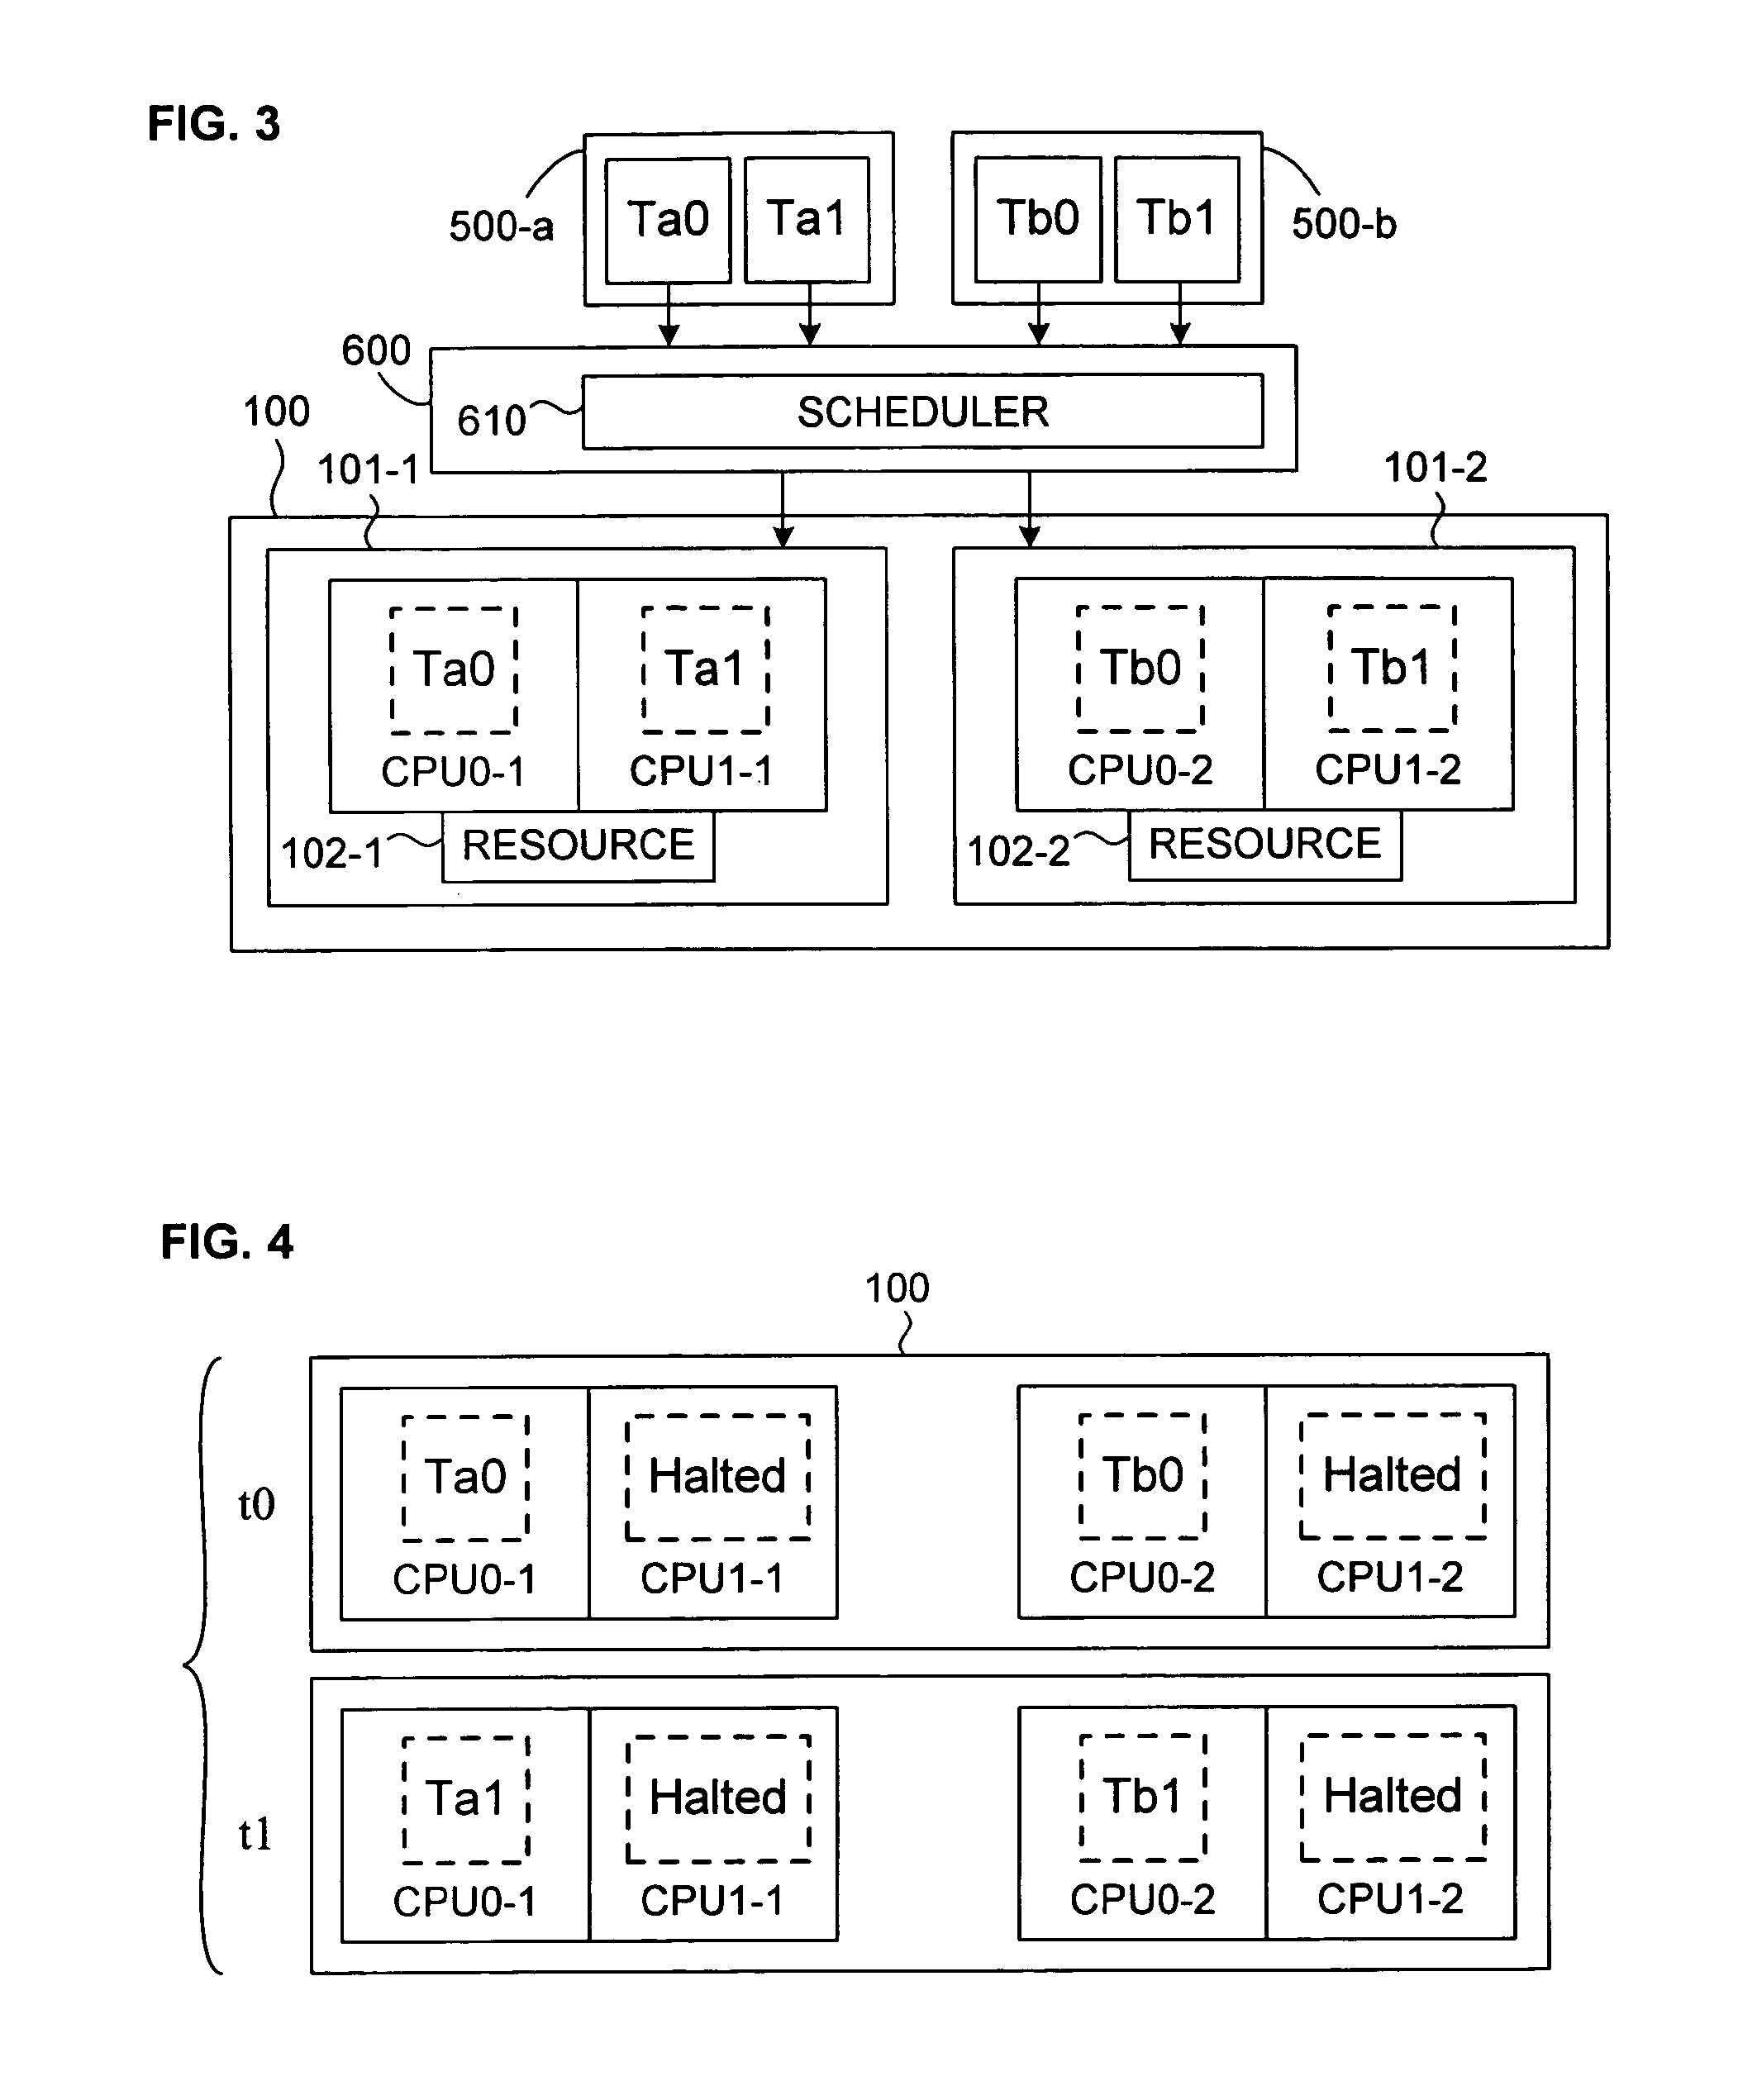 Mechanism for Scheduling Execution of Threads for Fair Resource Allocation in a Multi-Threaded and/or Multi-Core Processing System